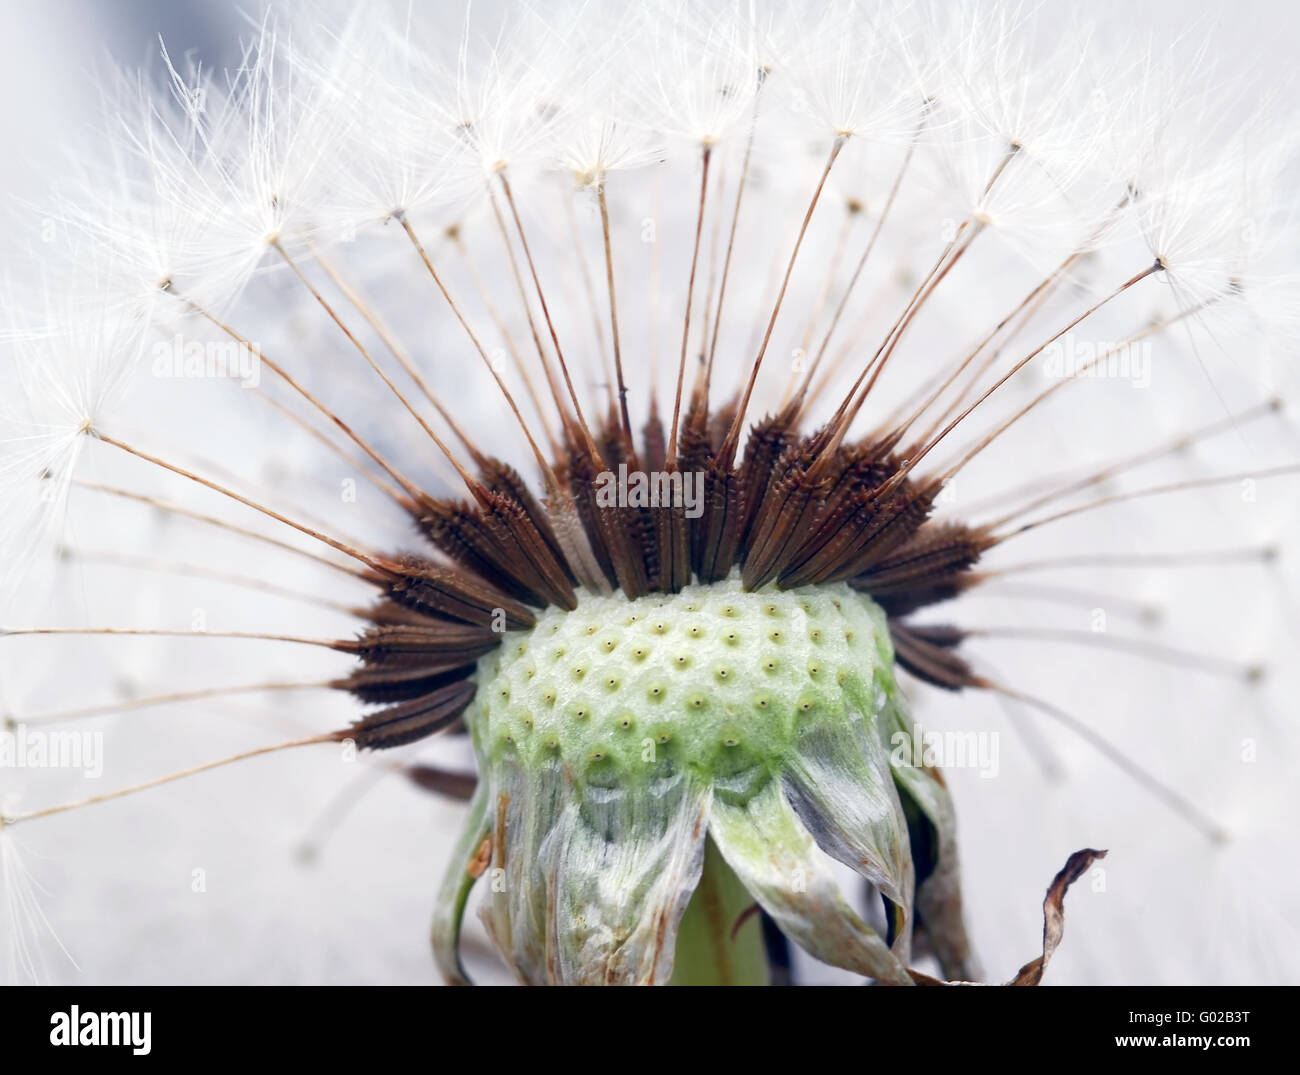 Extreme close-up of a dandelion in full bloom Stock Photo